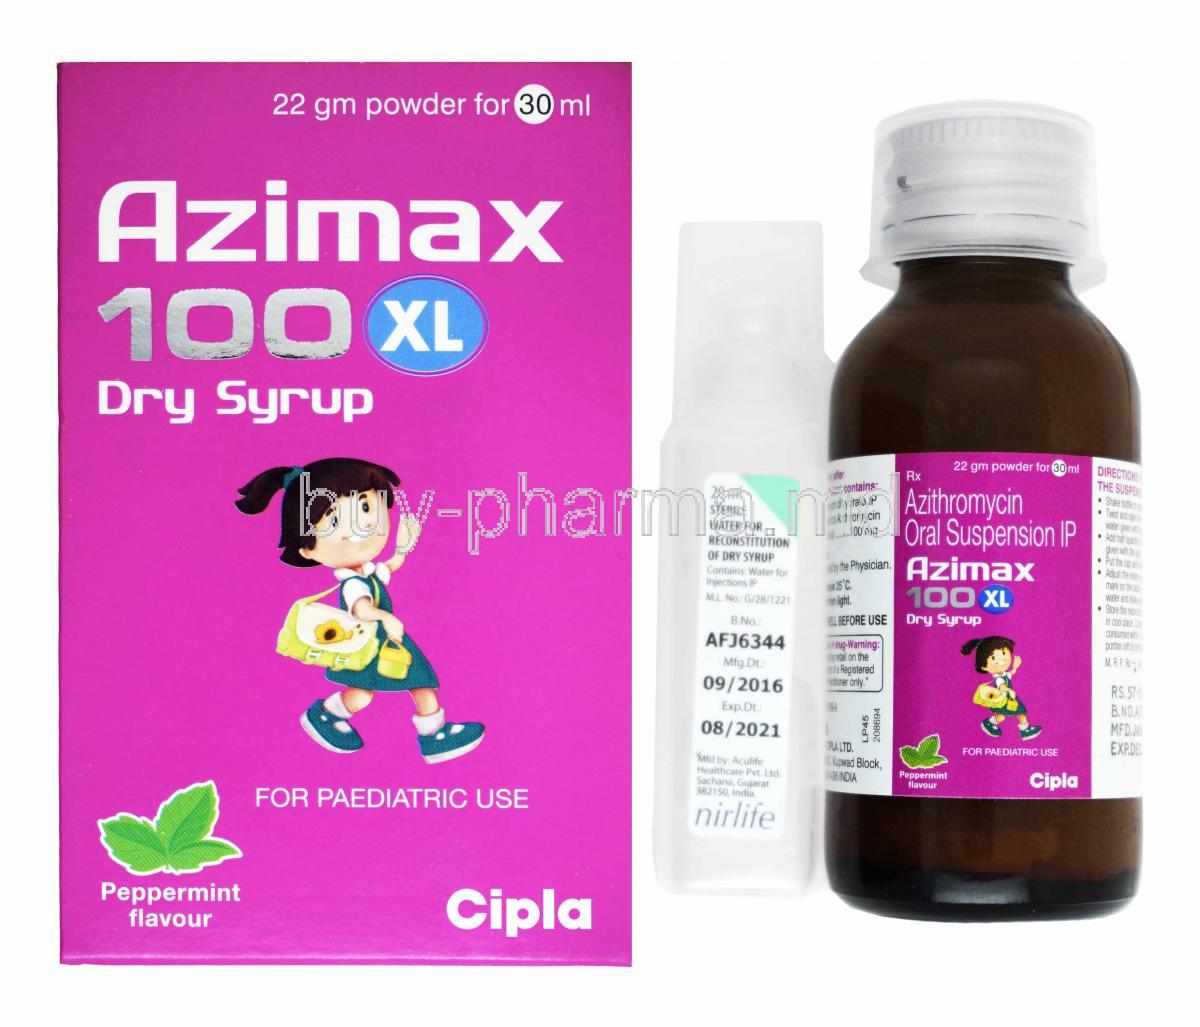 Azimax Dry Syrup, Azithromycin 100mg box and bottle